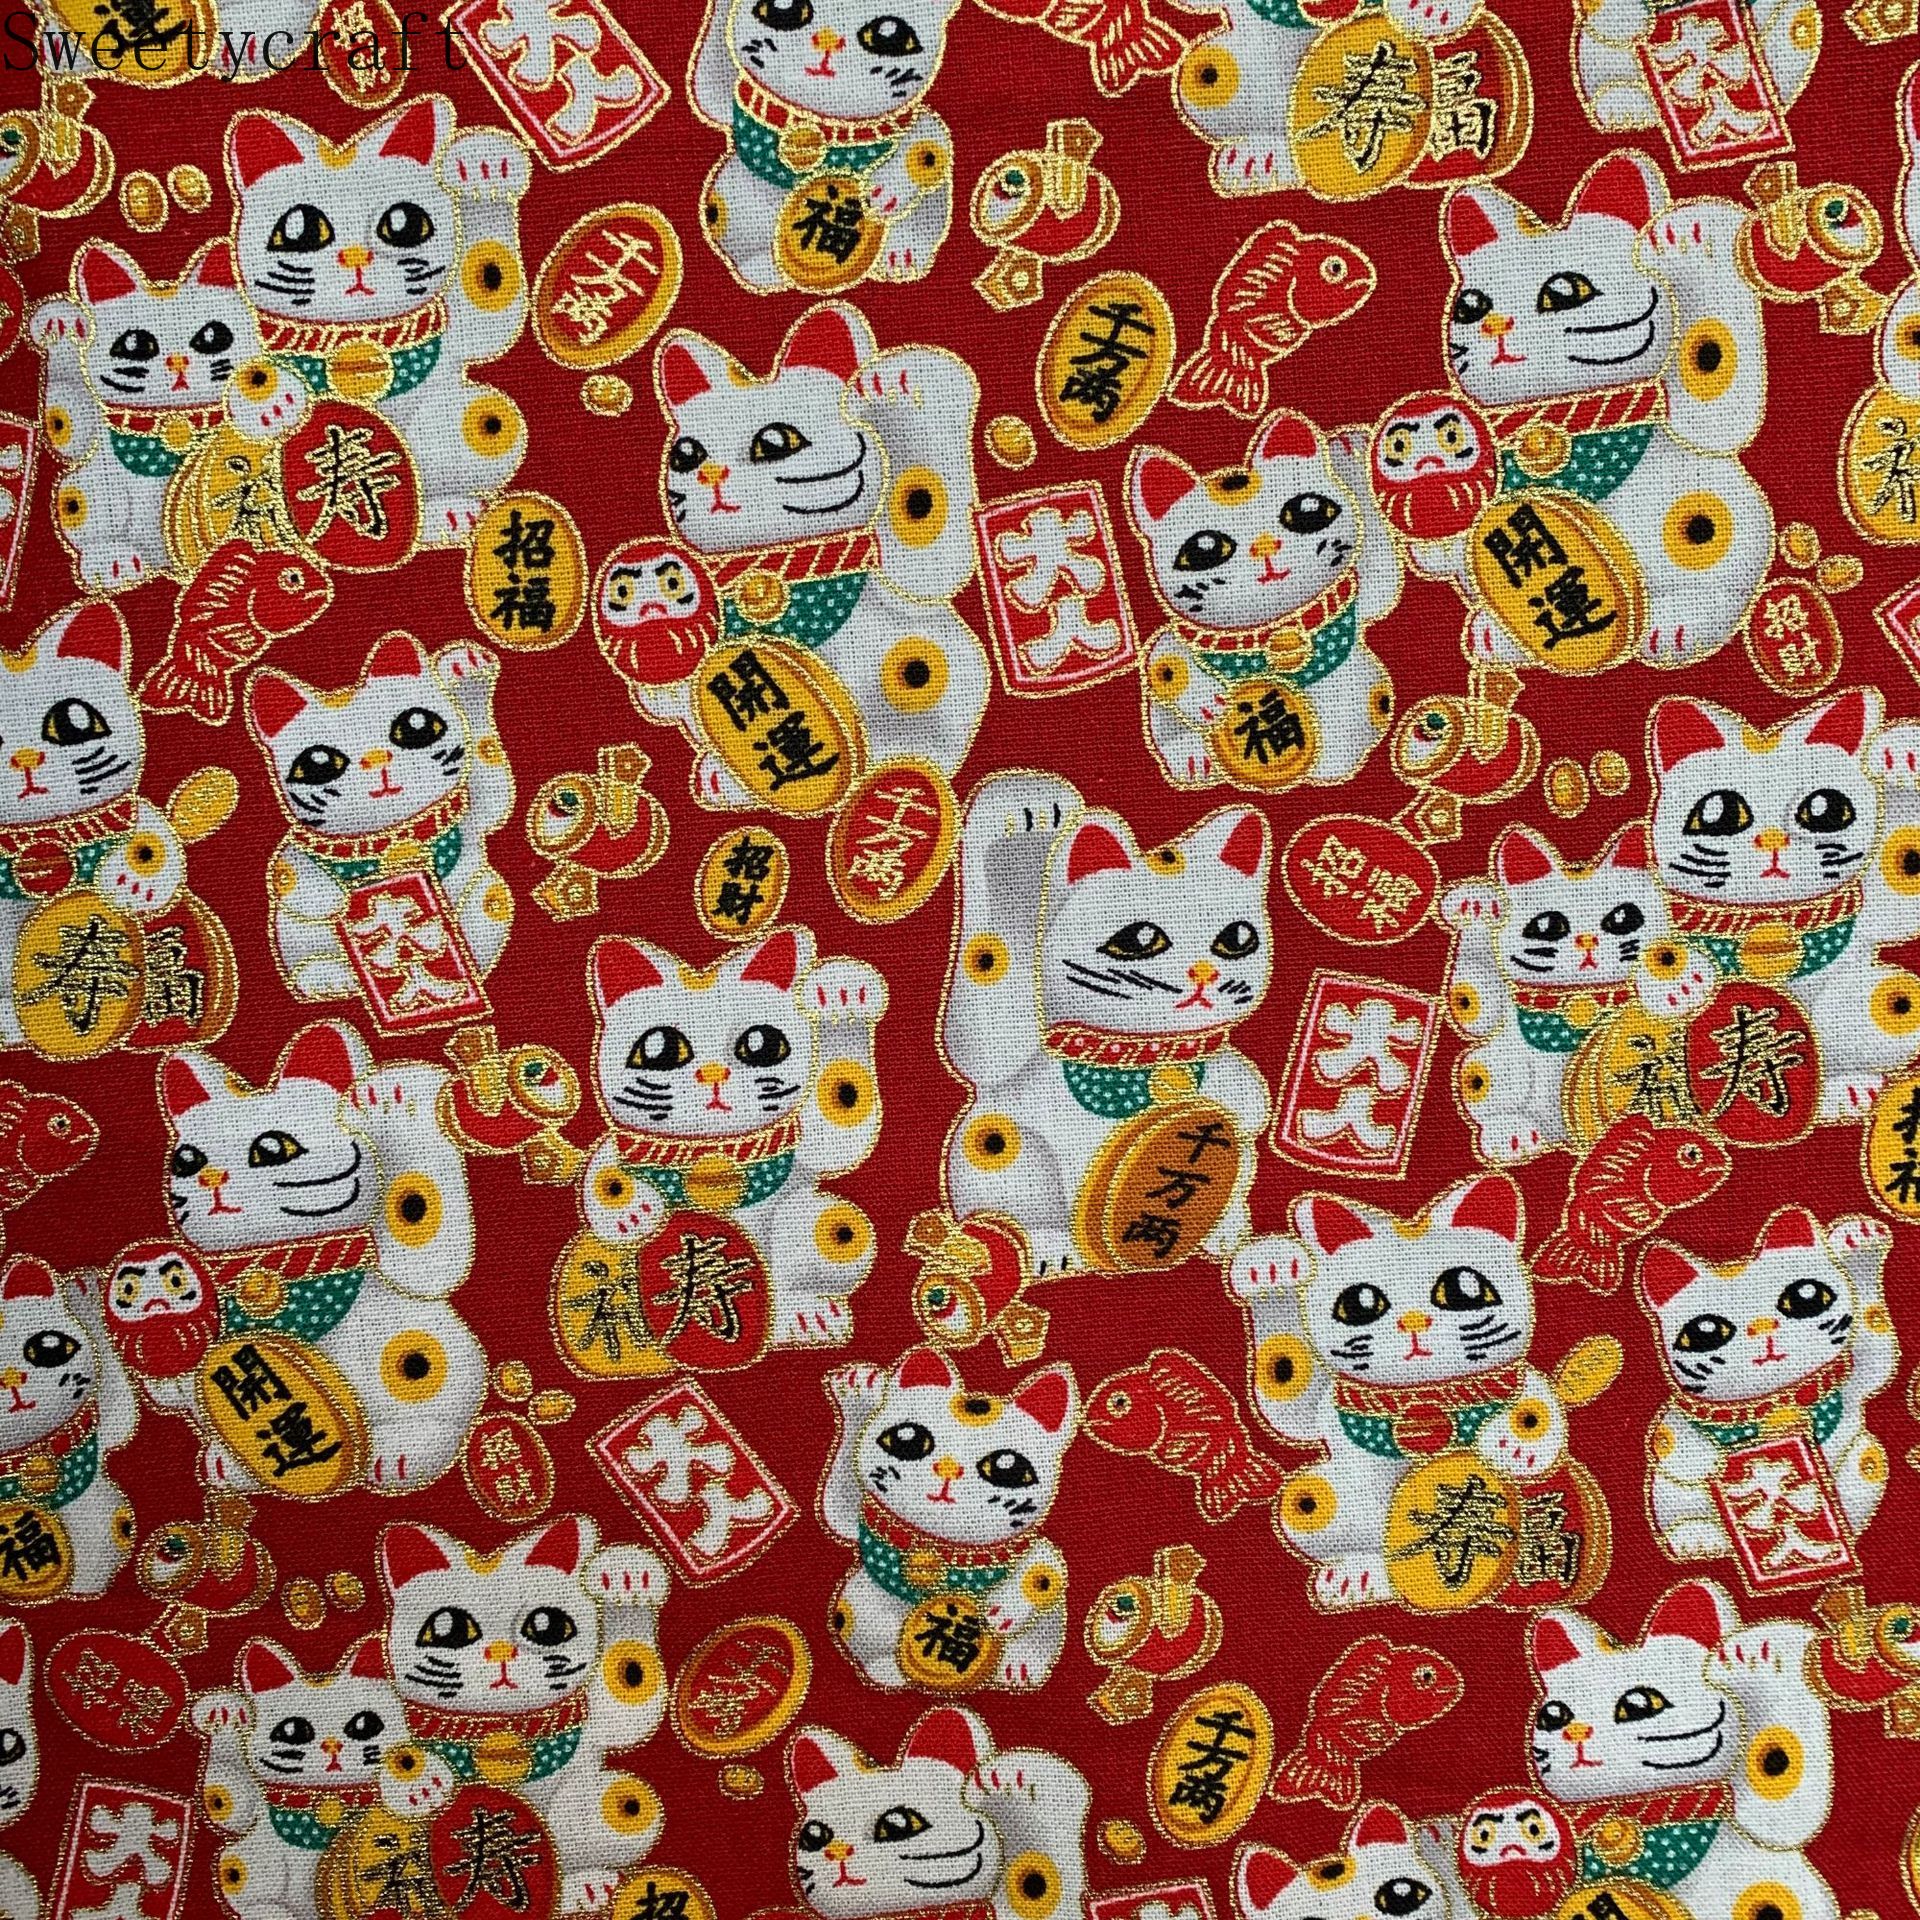 150x100cm Lucky Cat Printed bronzing Cotton Fabric Cloth Sewing Quilting Fabric for Patchwork Needlework DIY Handmade Material